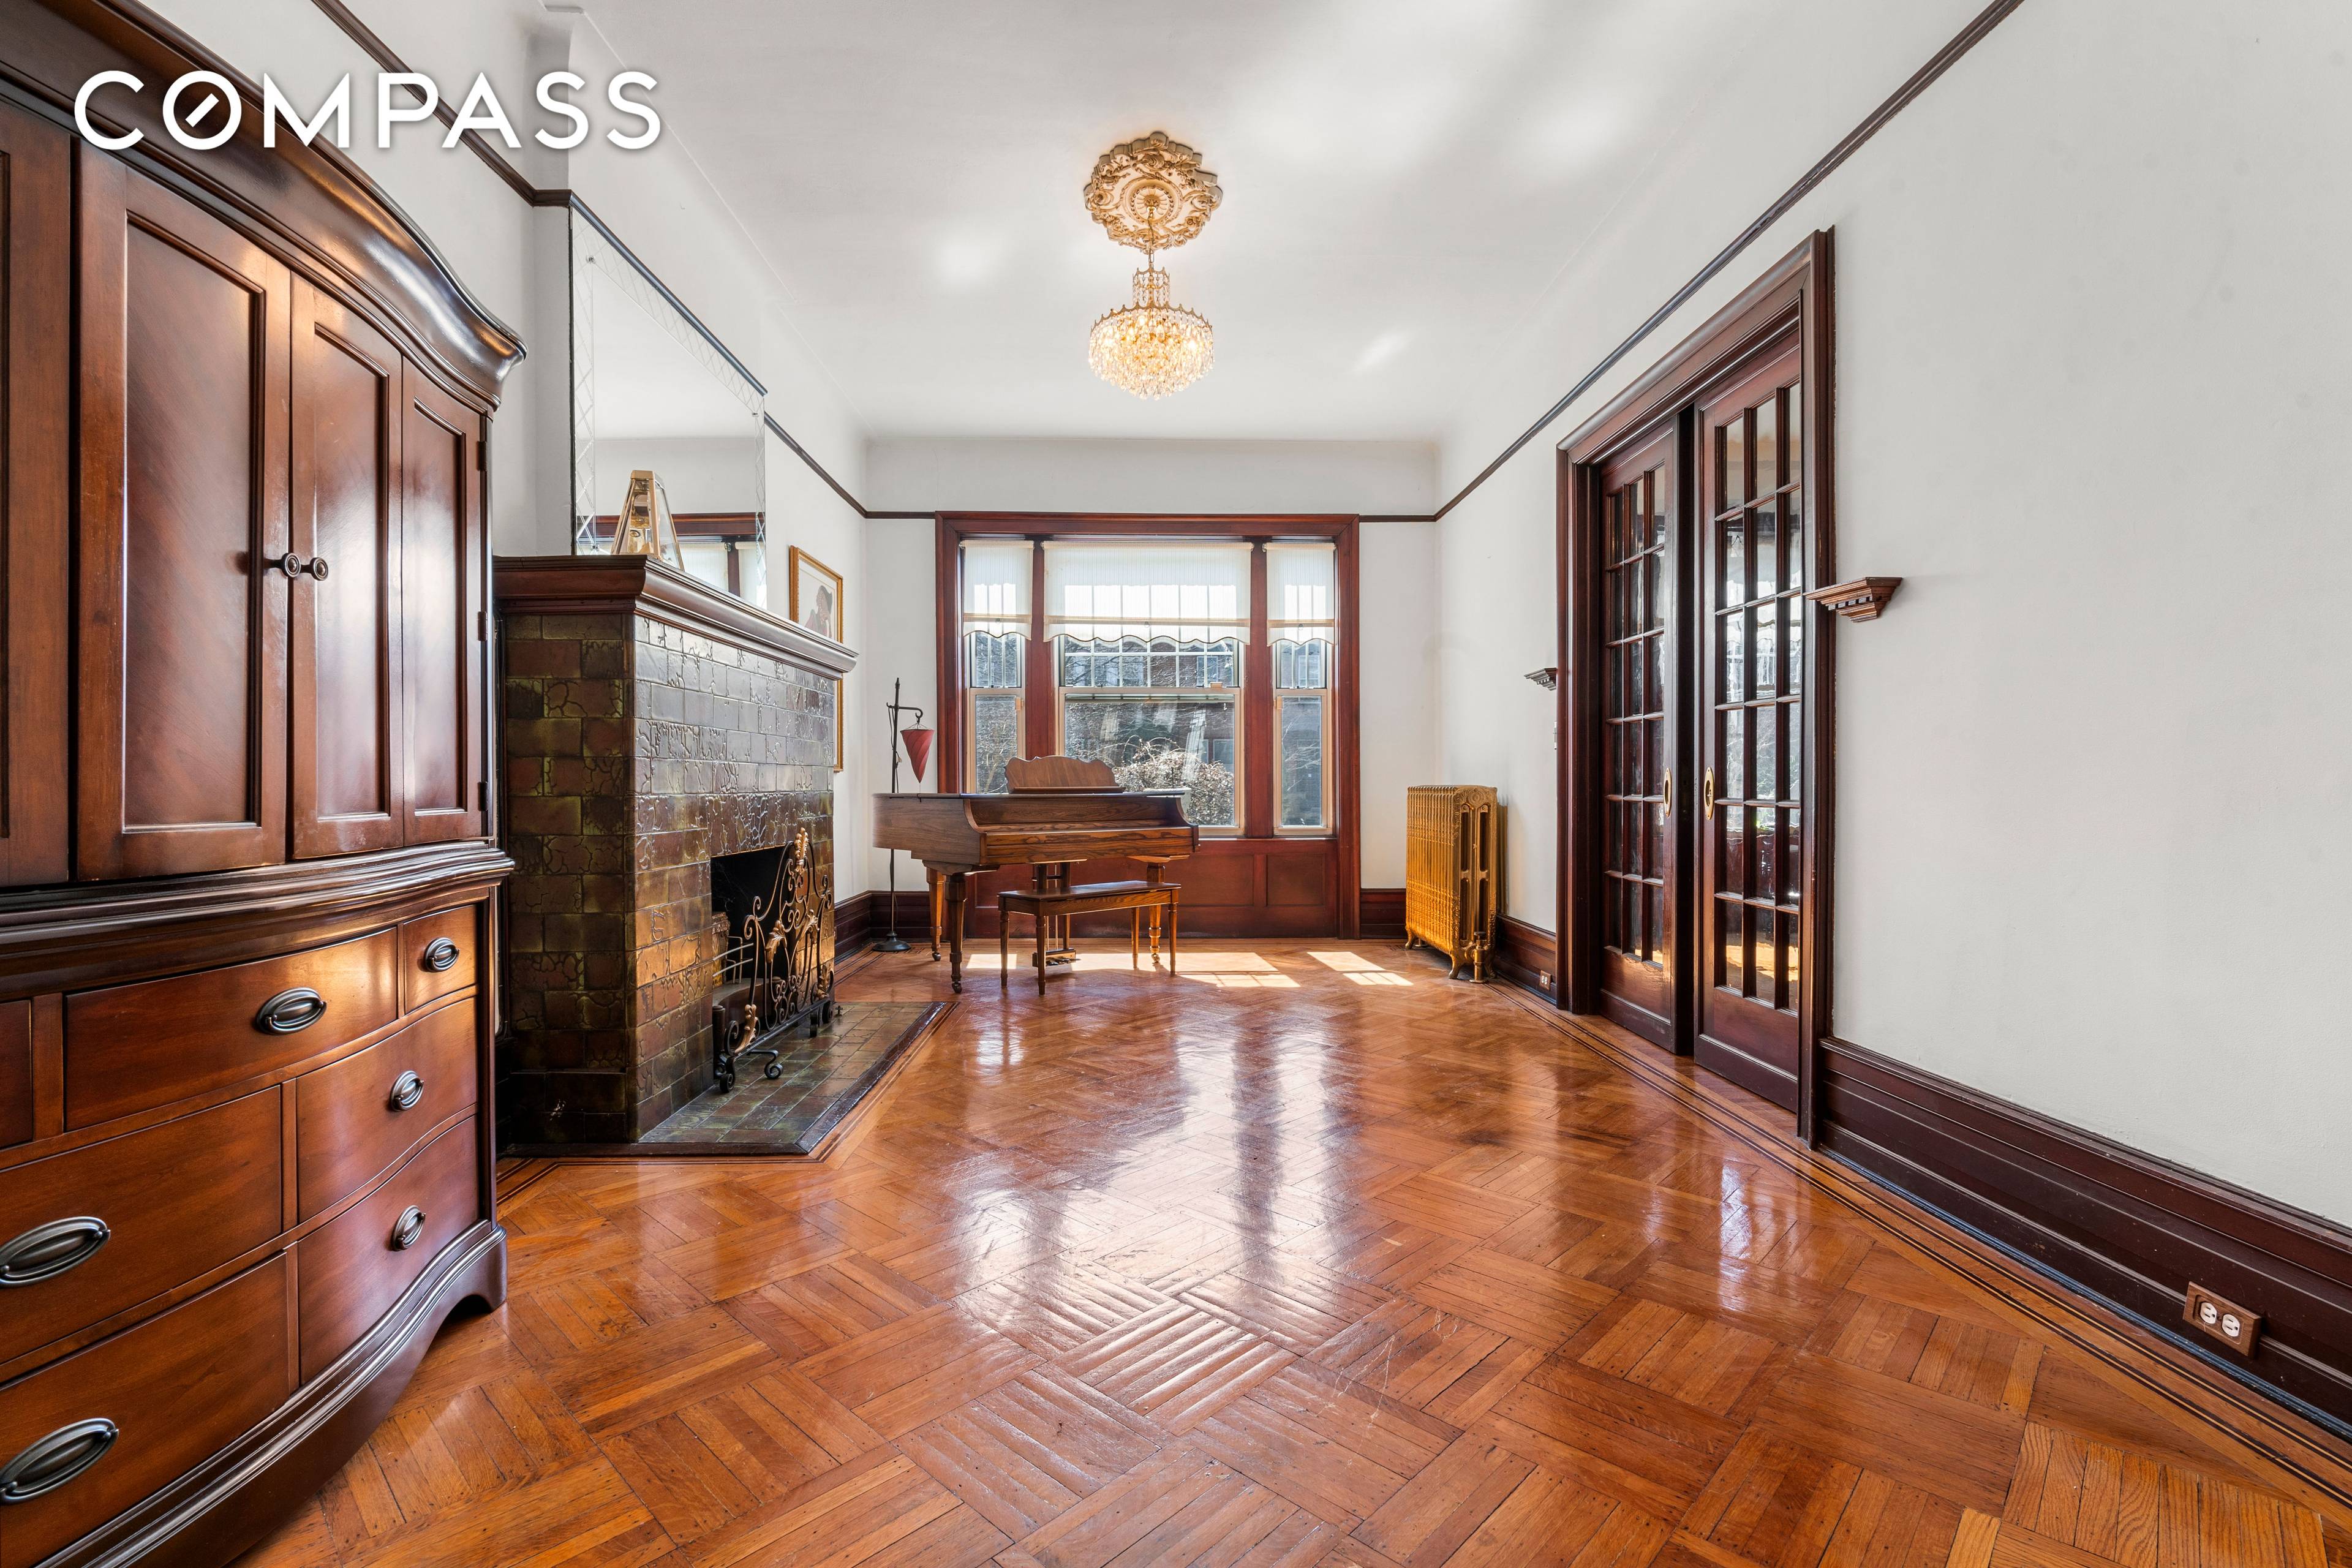 Nestled within the picturesque charm of a tree lined Crown Heights block, this captivating cottage style home exudes the quaint appeal of a bygone era.